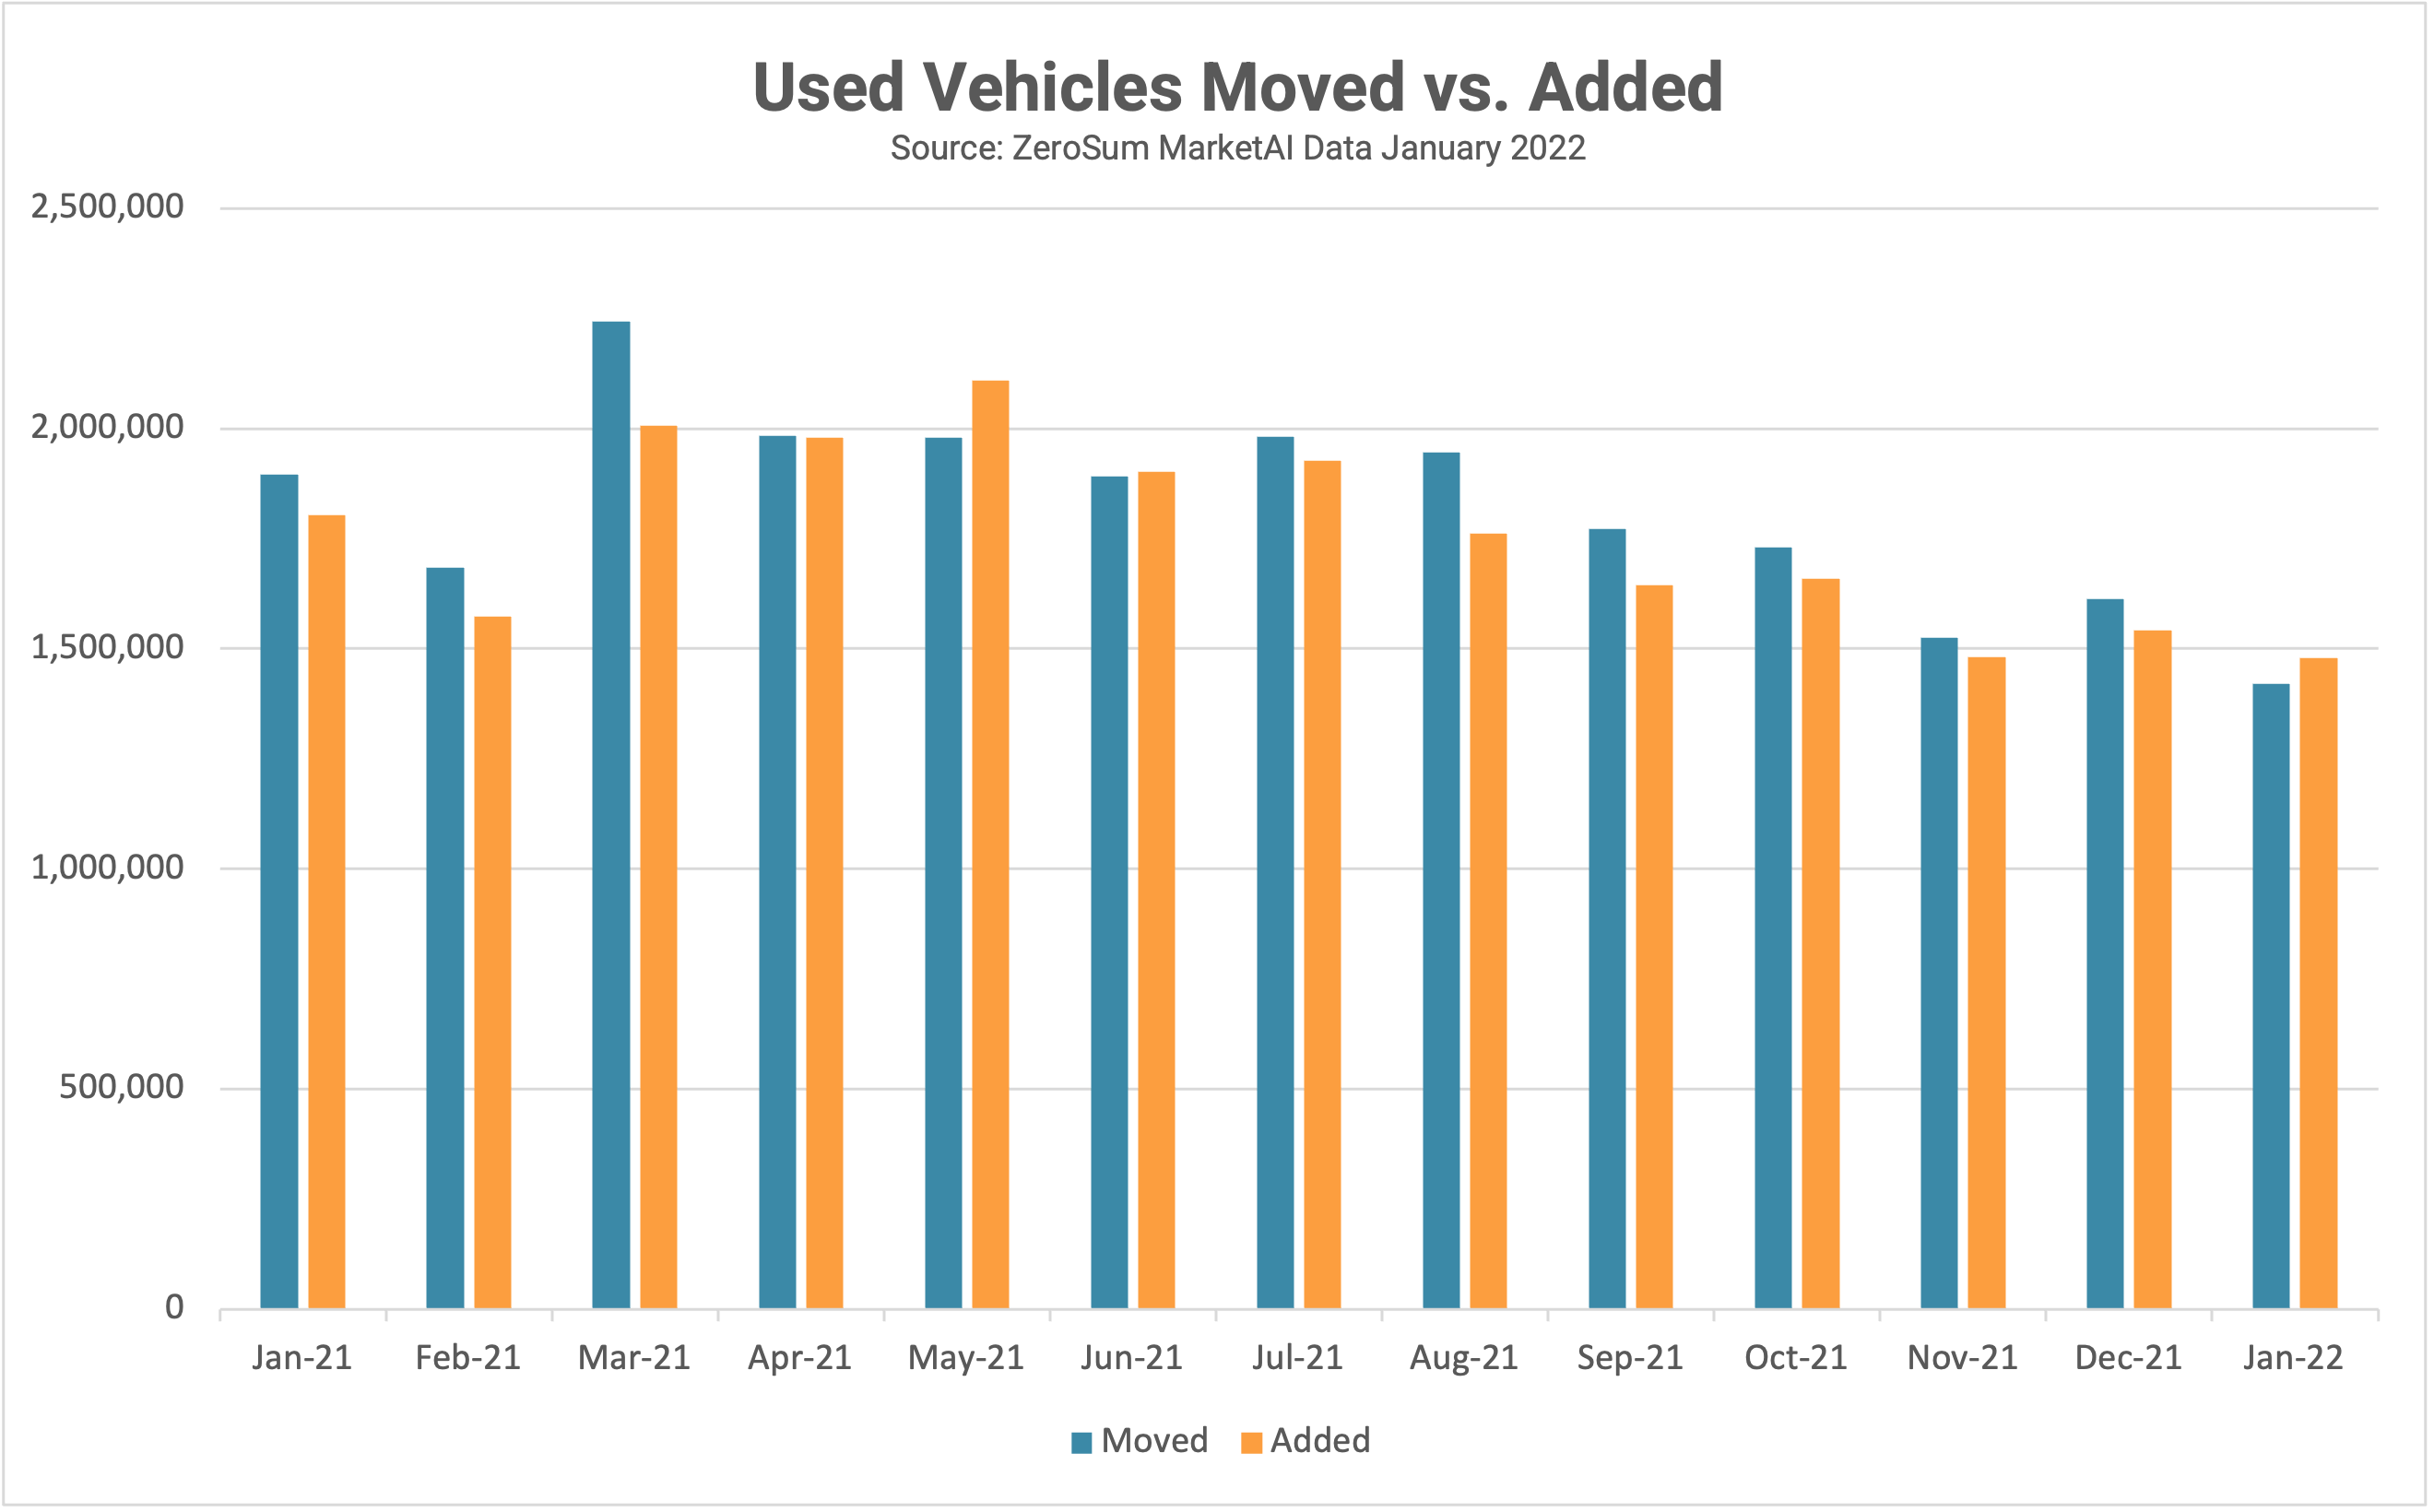 chart showing used vehicle units moved vs. added